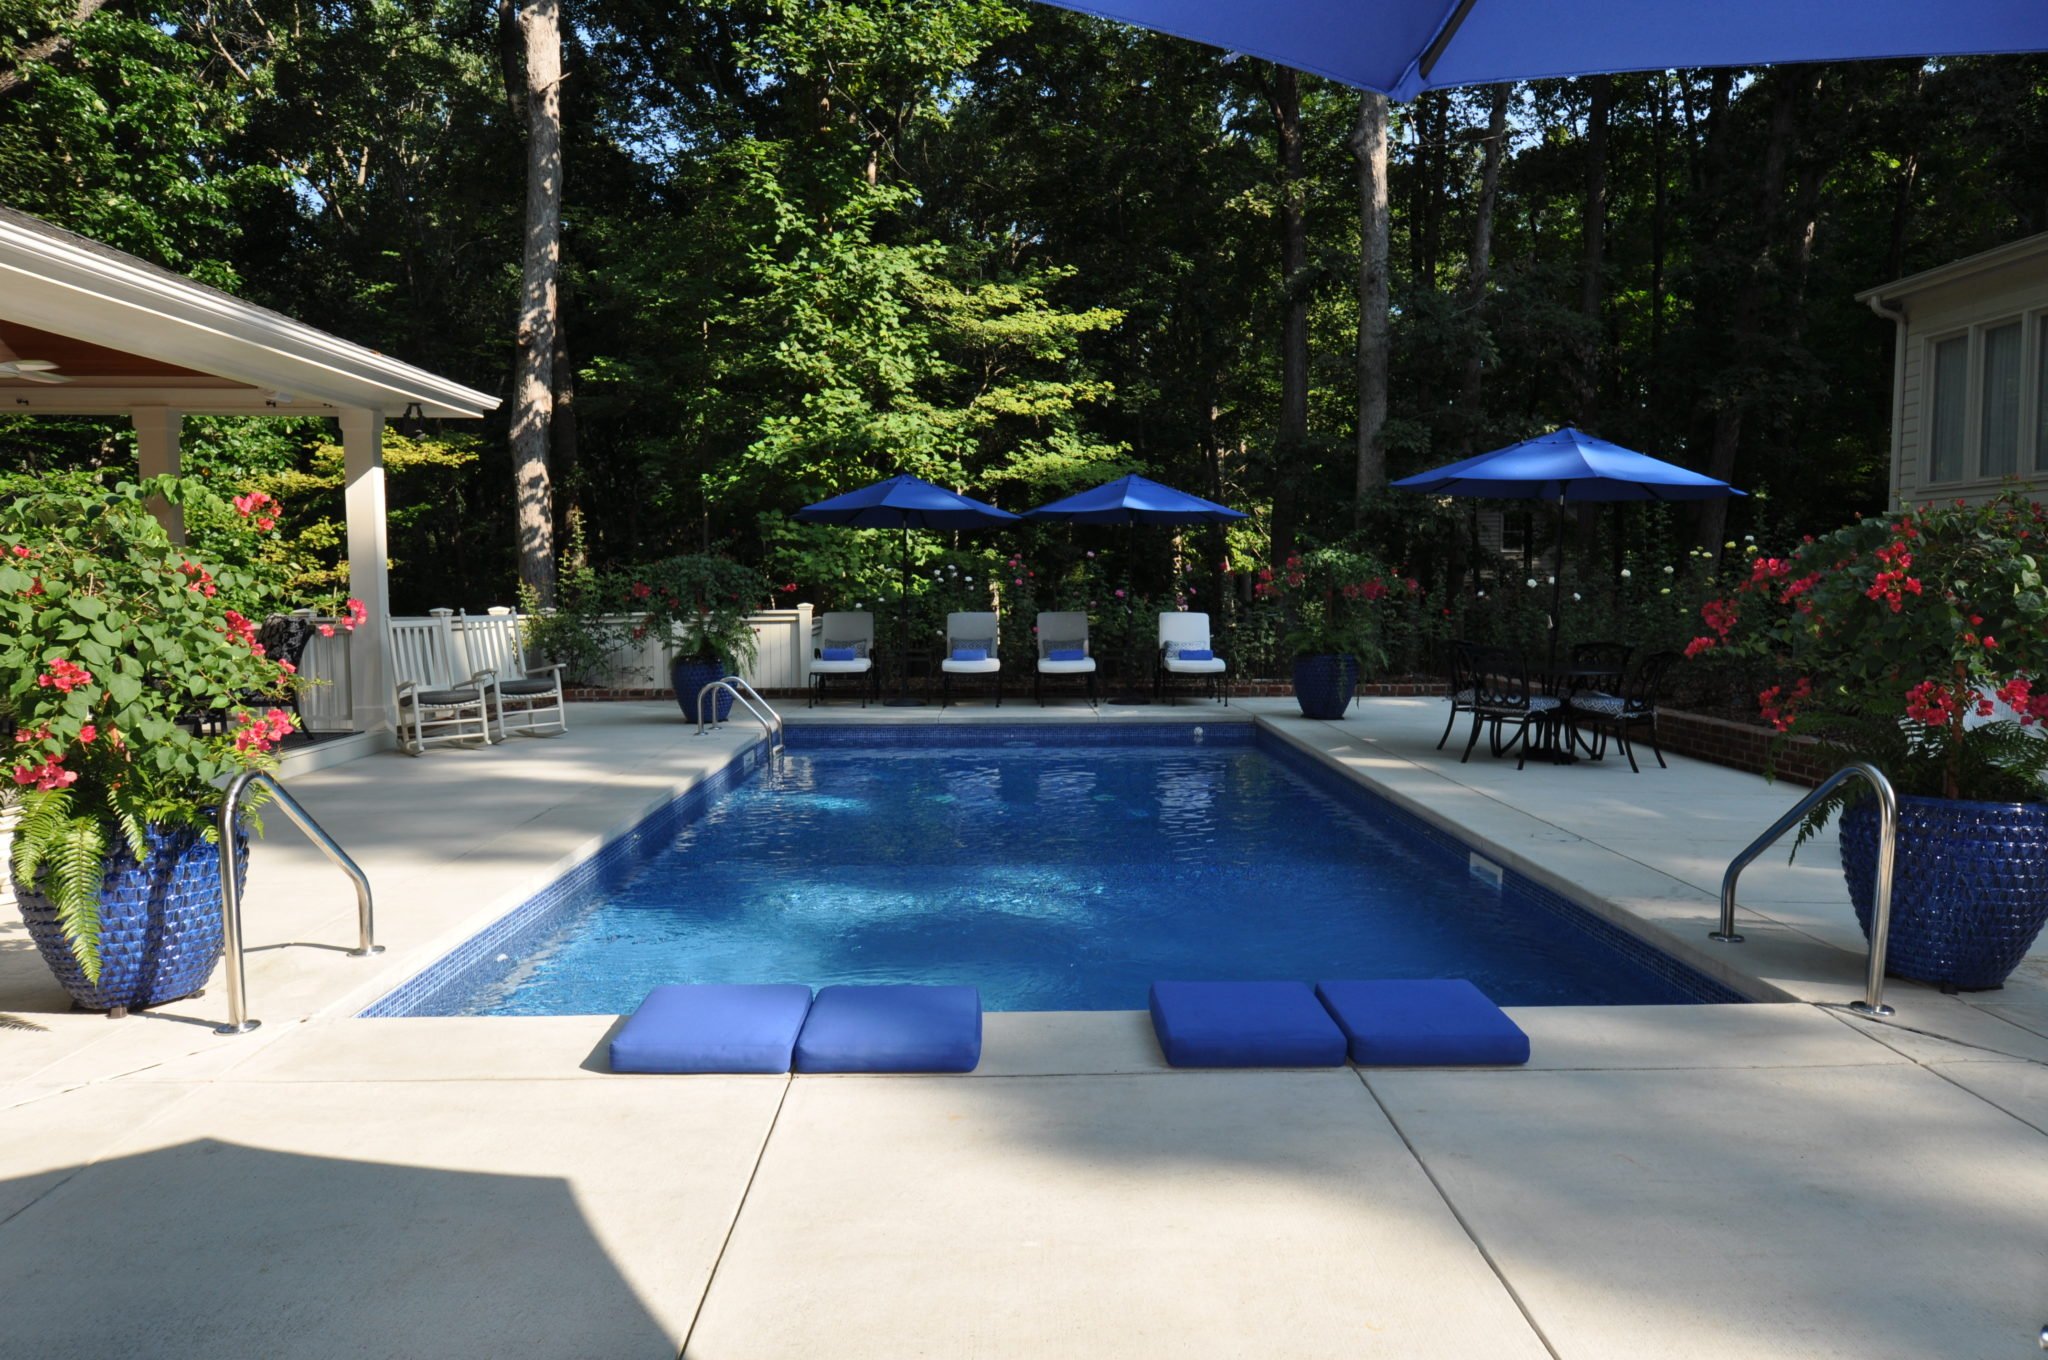 Rising sun pools and spas backyard pool with chairs and umbrellas